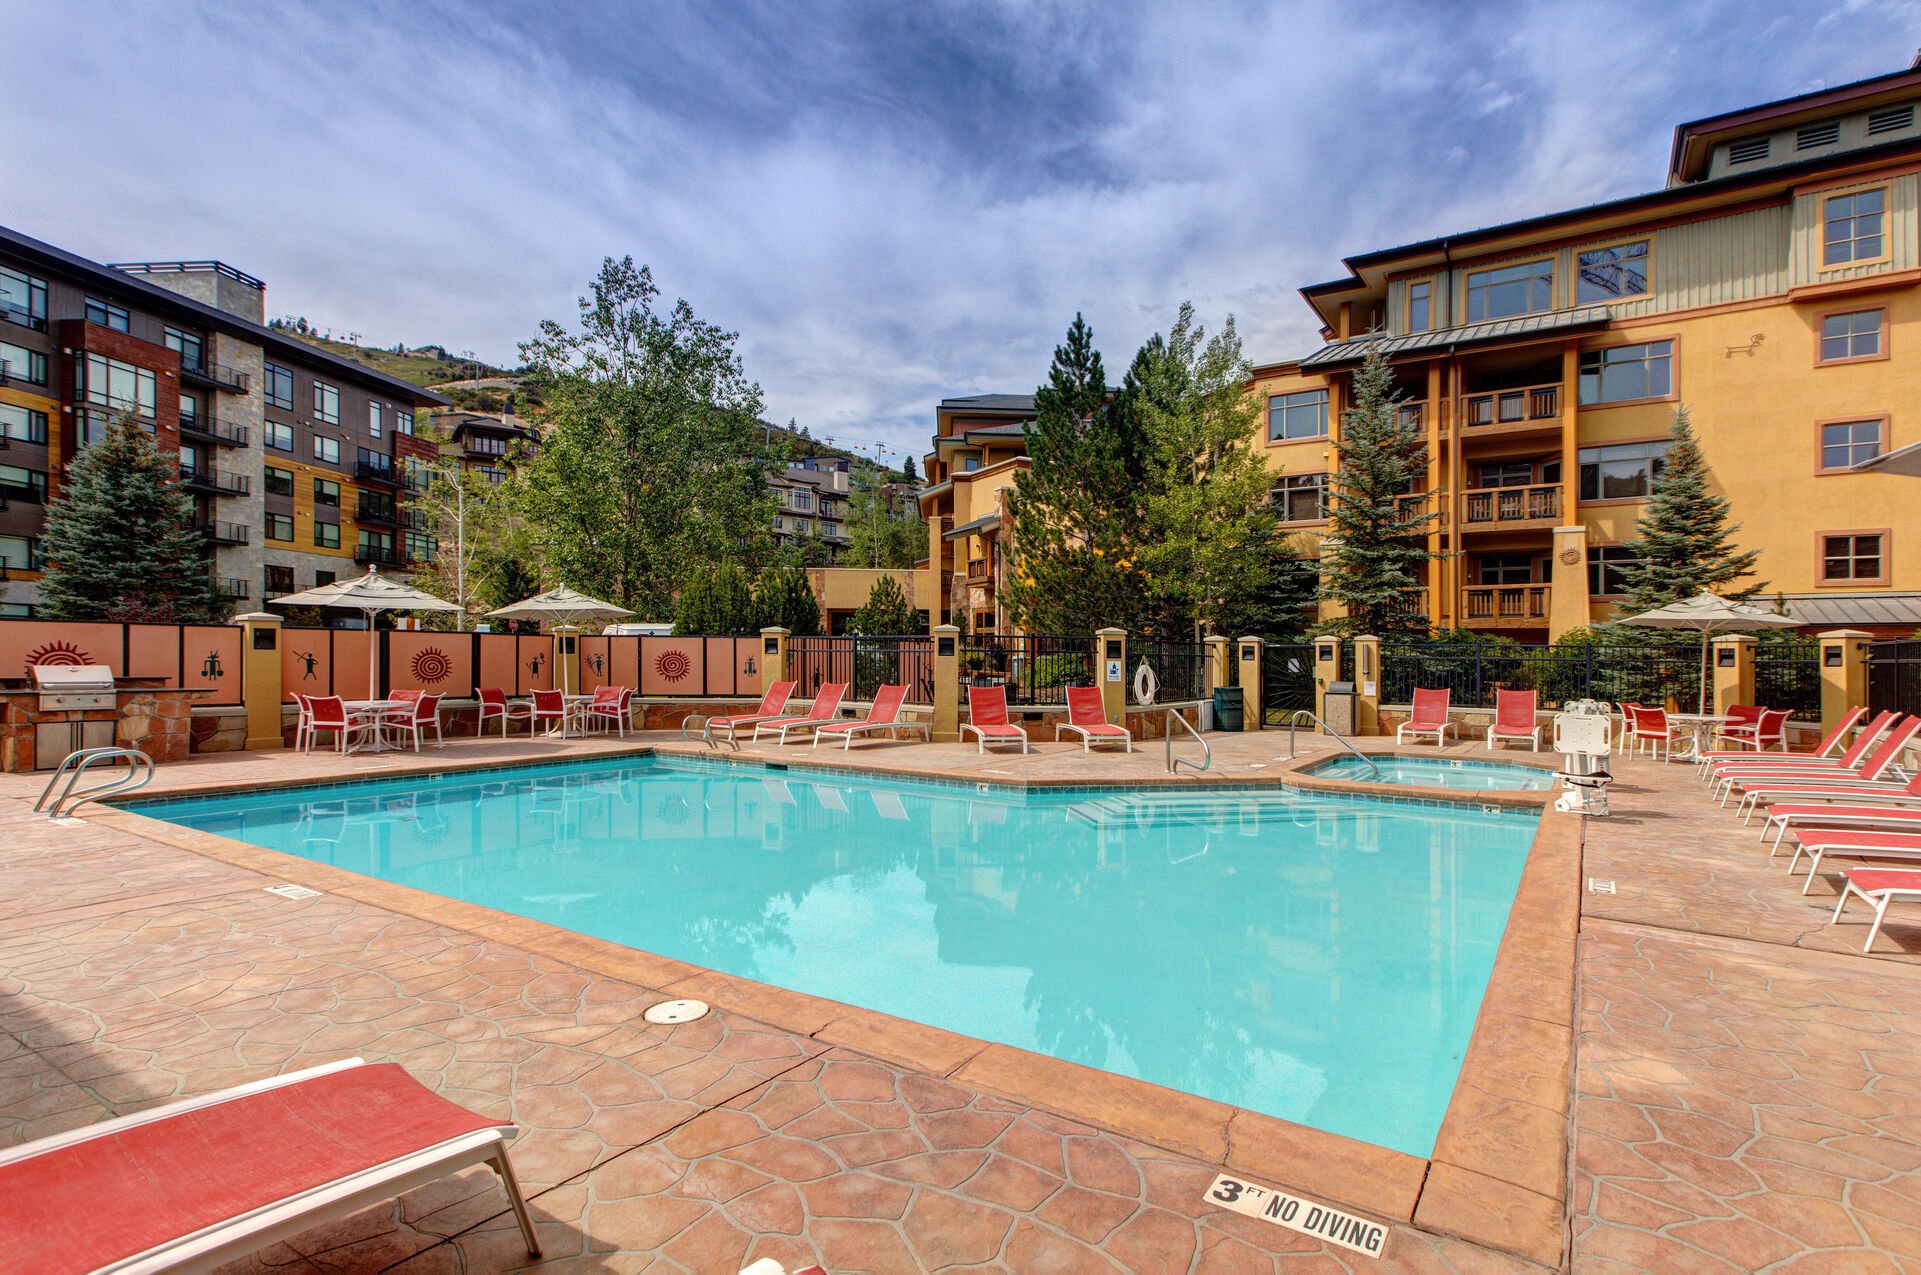 Community Amenities with outdoor firepit, hot tub, pool, fitness center, and grill area